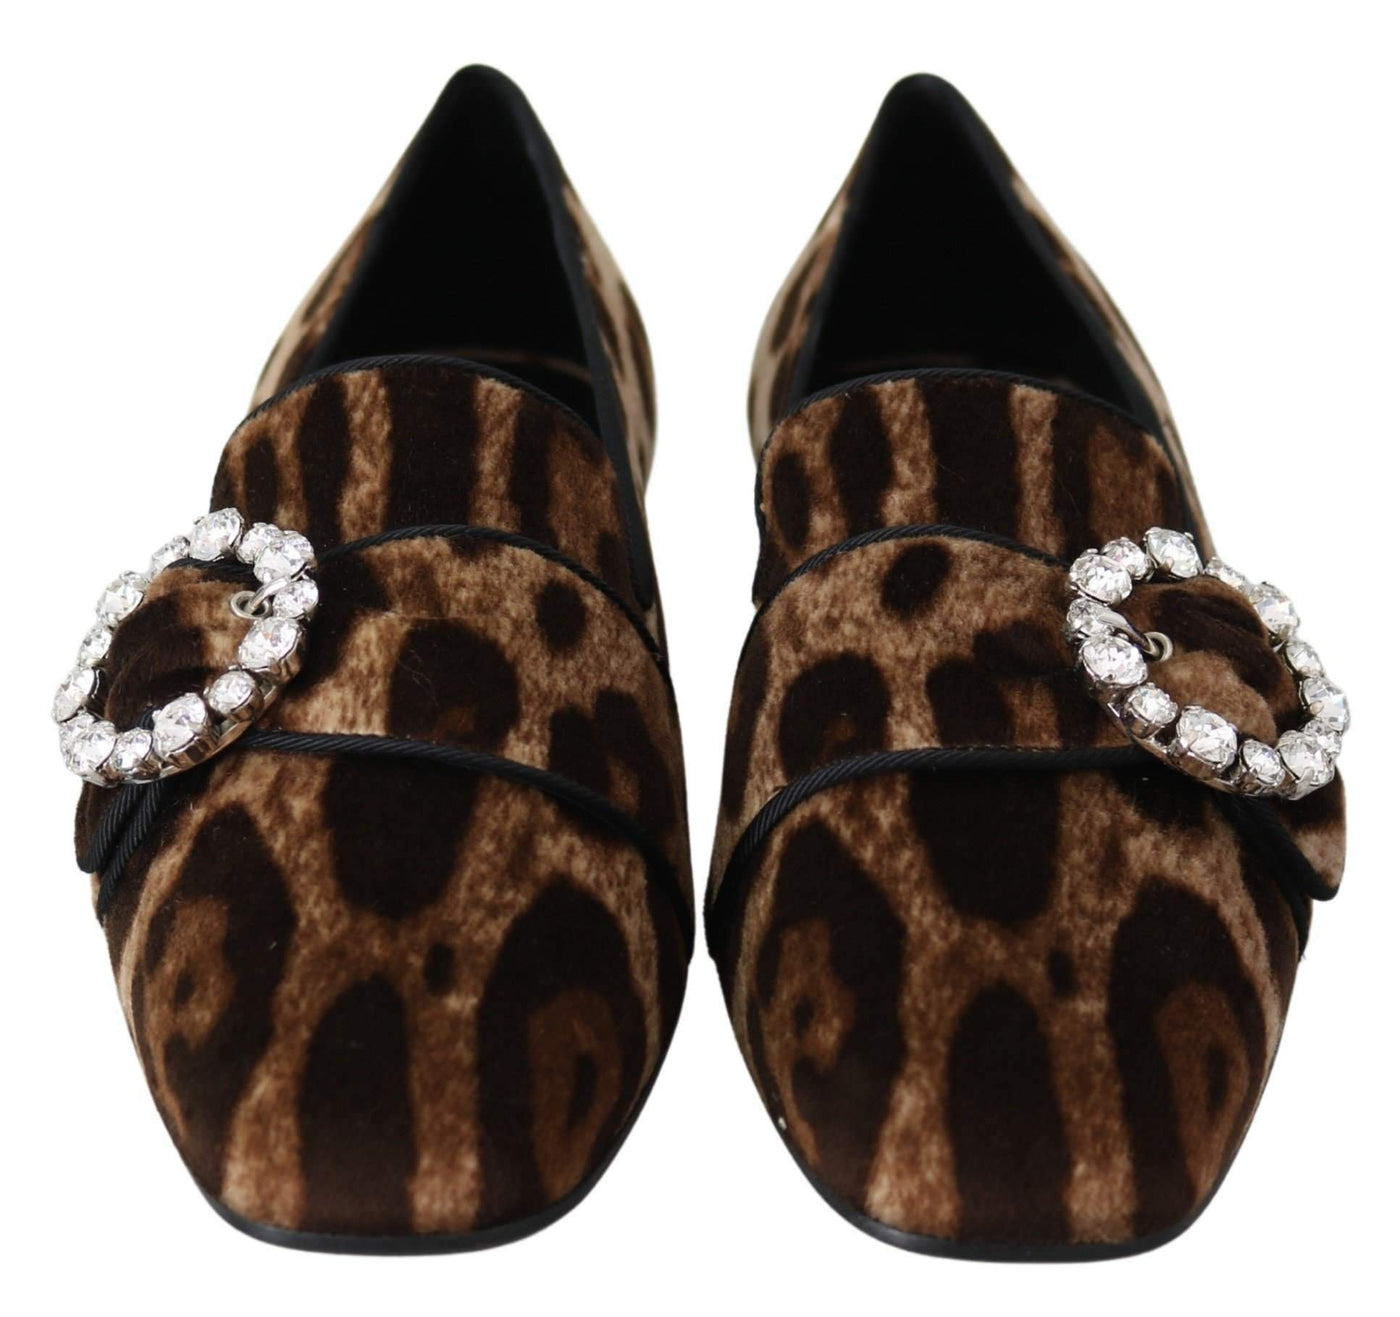 Dolce & Gabbana Brown Leopard Print Crystals Loafers Flats Shoes #women, Brand_Dolce & Gabbana, Brown, Dolce & Gabbana, EU35/US4.5, EU37.5/US7, feed-agegroup-adult, feed-color-brown, feed-gender-female, feed-size-US4.5, feed-size-US7, Flat Shoes - Women - Shoes, Gender_Women, Shoes - New Arrivals at SEYMAYKA